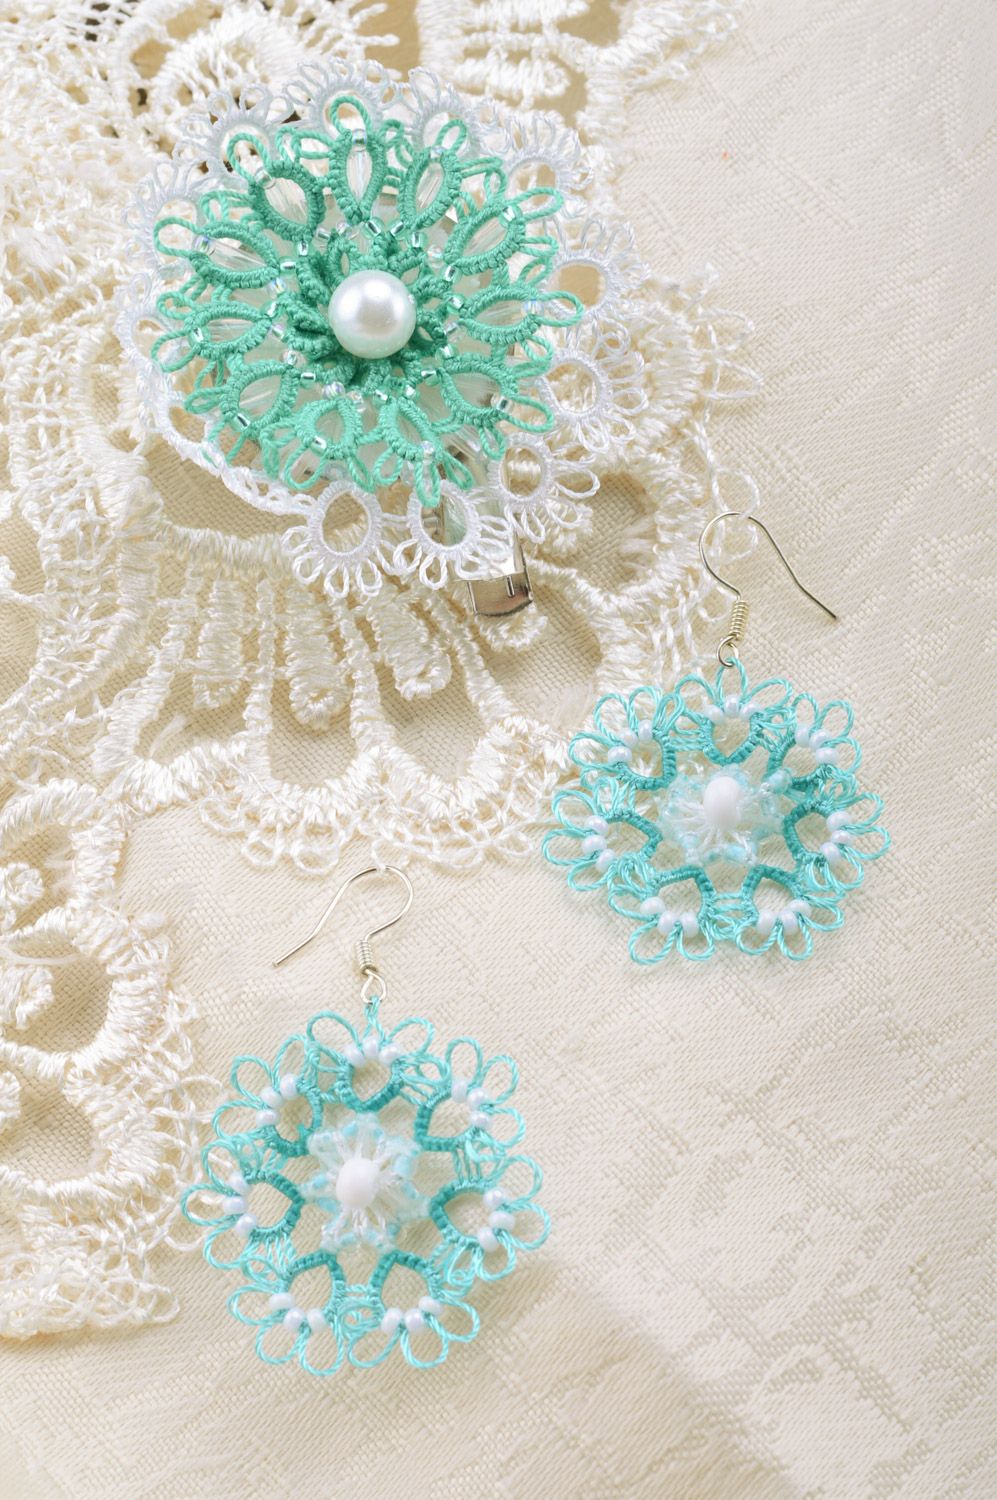 Handmade tatting woven jewelry set 2 items turquoise earrings and brooch hair clip photo 5